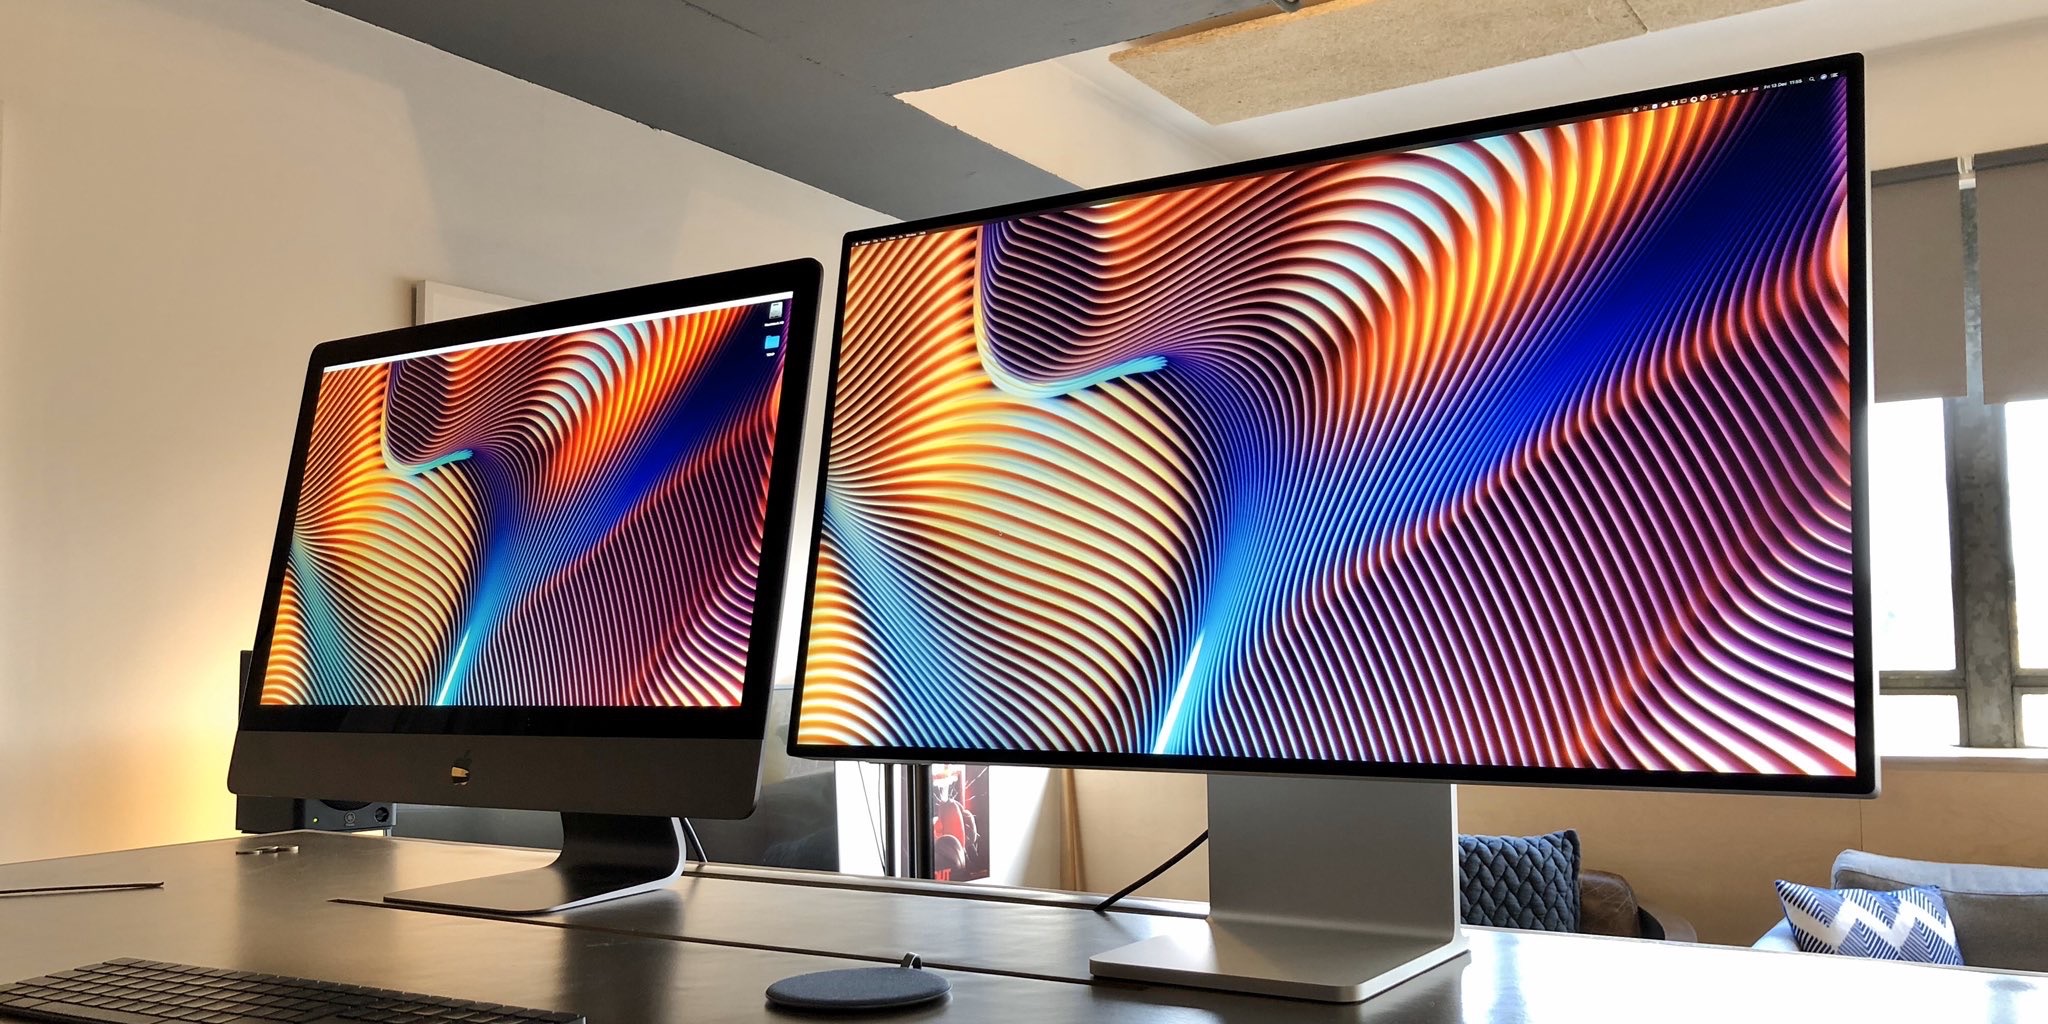 Apple Pro Display XDR works with iMac Pro, but with limitations 9to5Mac